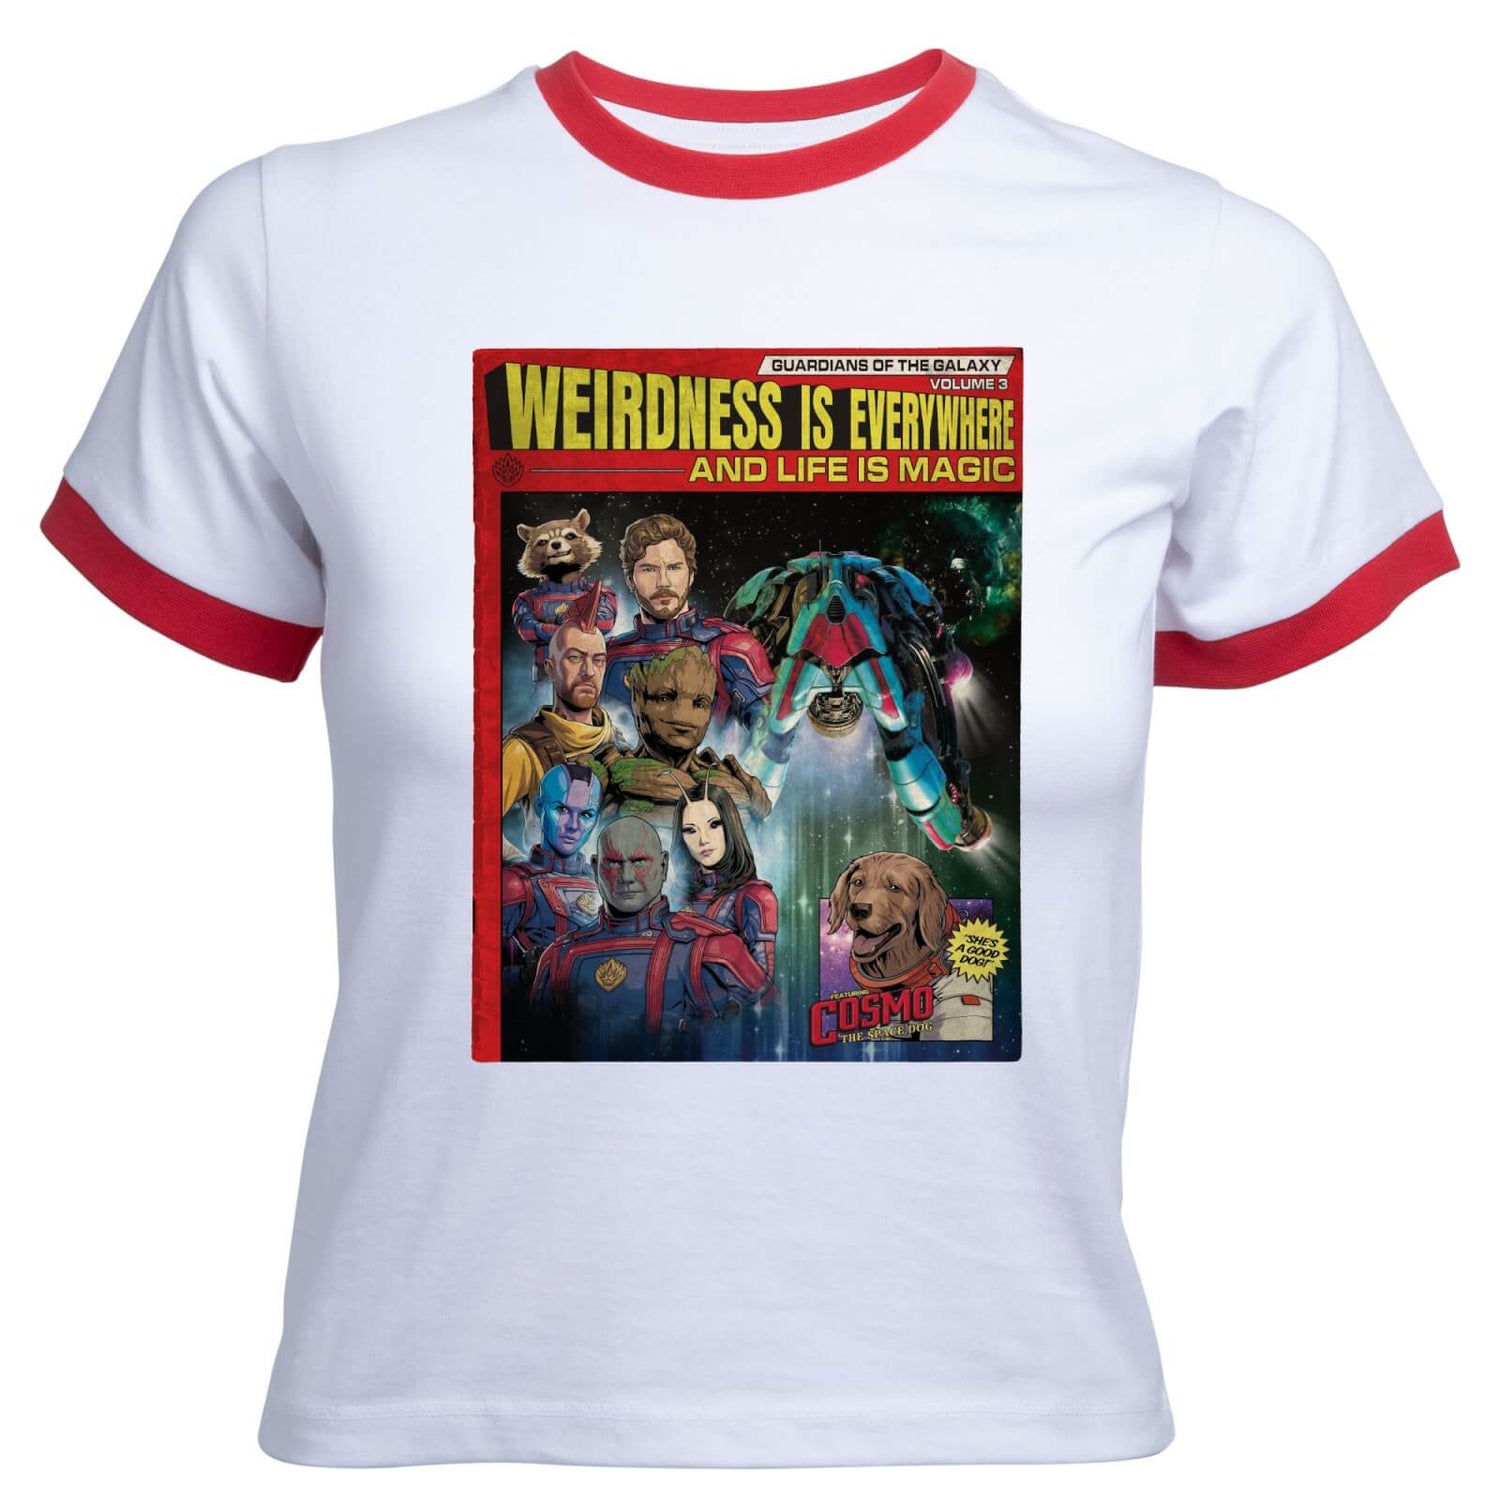 Guardians of the Galaxy Weirdness Is Everywhere Comic Book Cover Women's Cropped Ringer T-Shirt - White Red